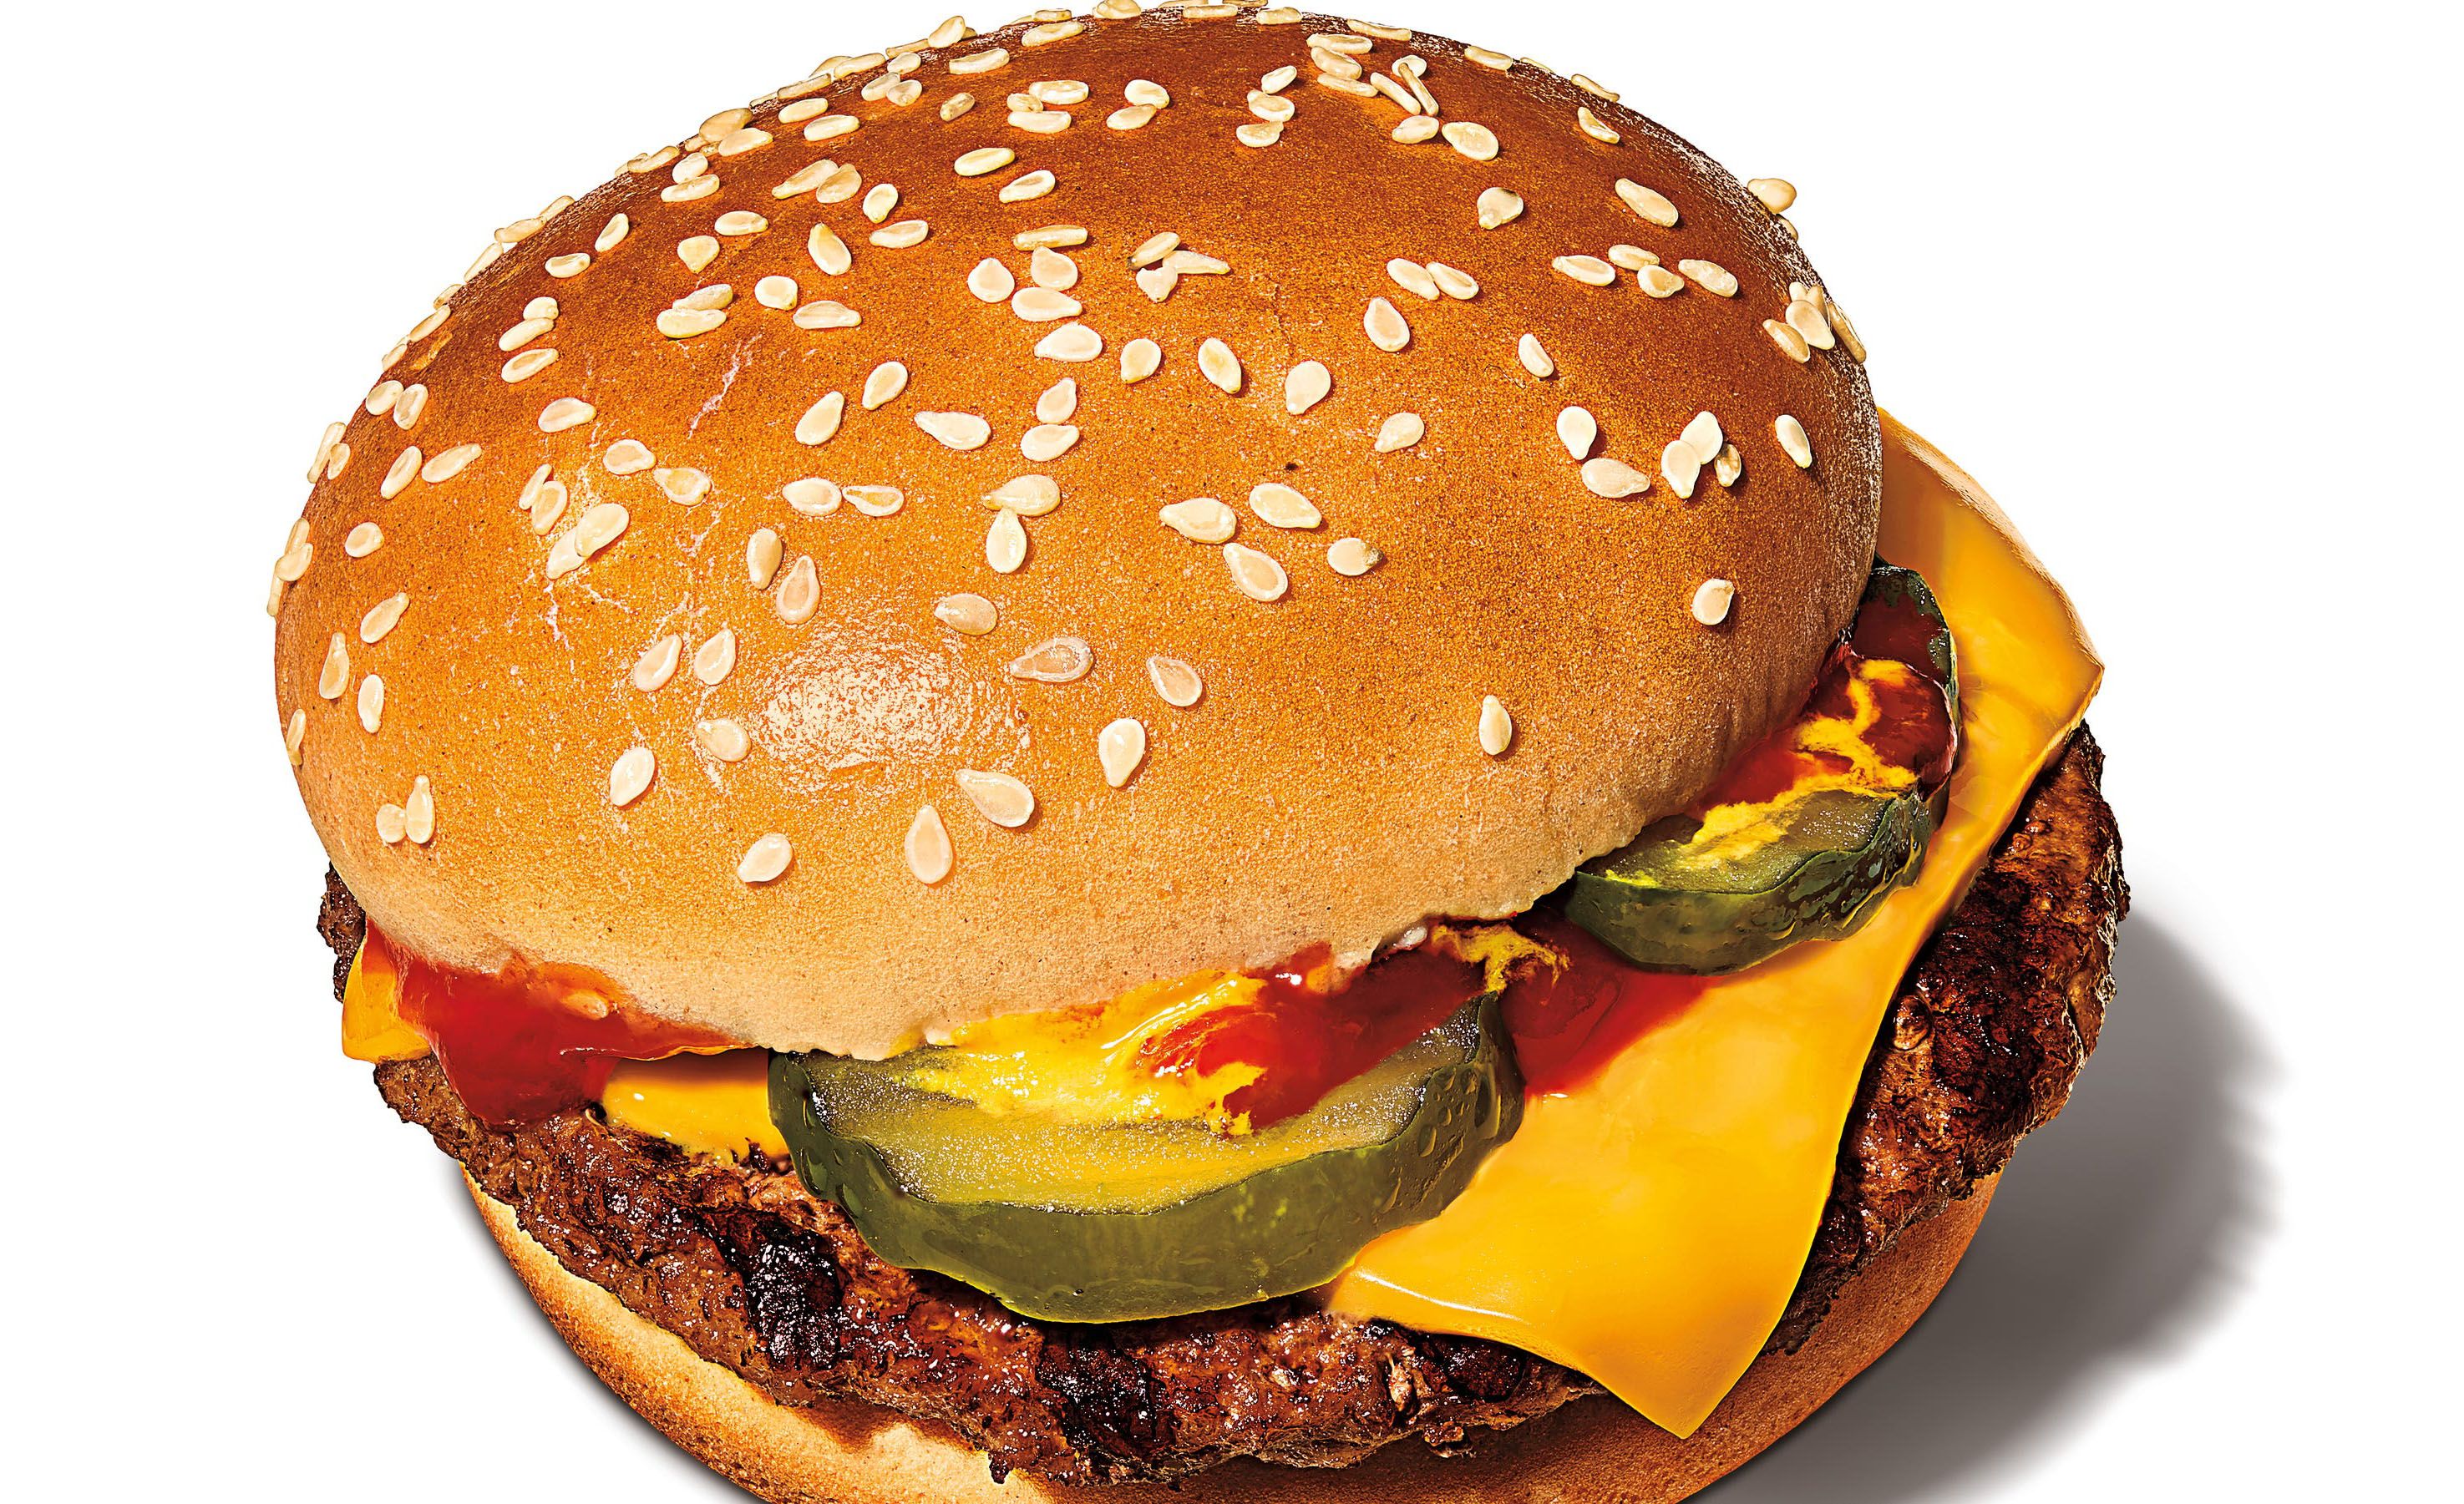 Get a Free Cheeseburger with a $1+ Online or In-app Purchase at Burger King on September 18: A Rewards Exclusive